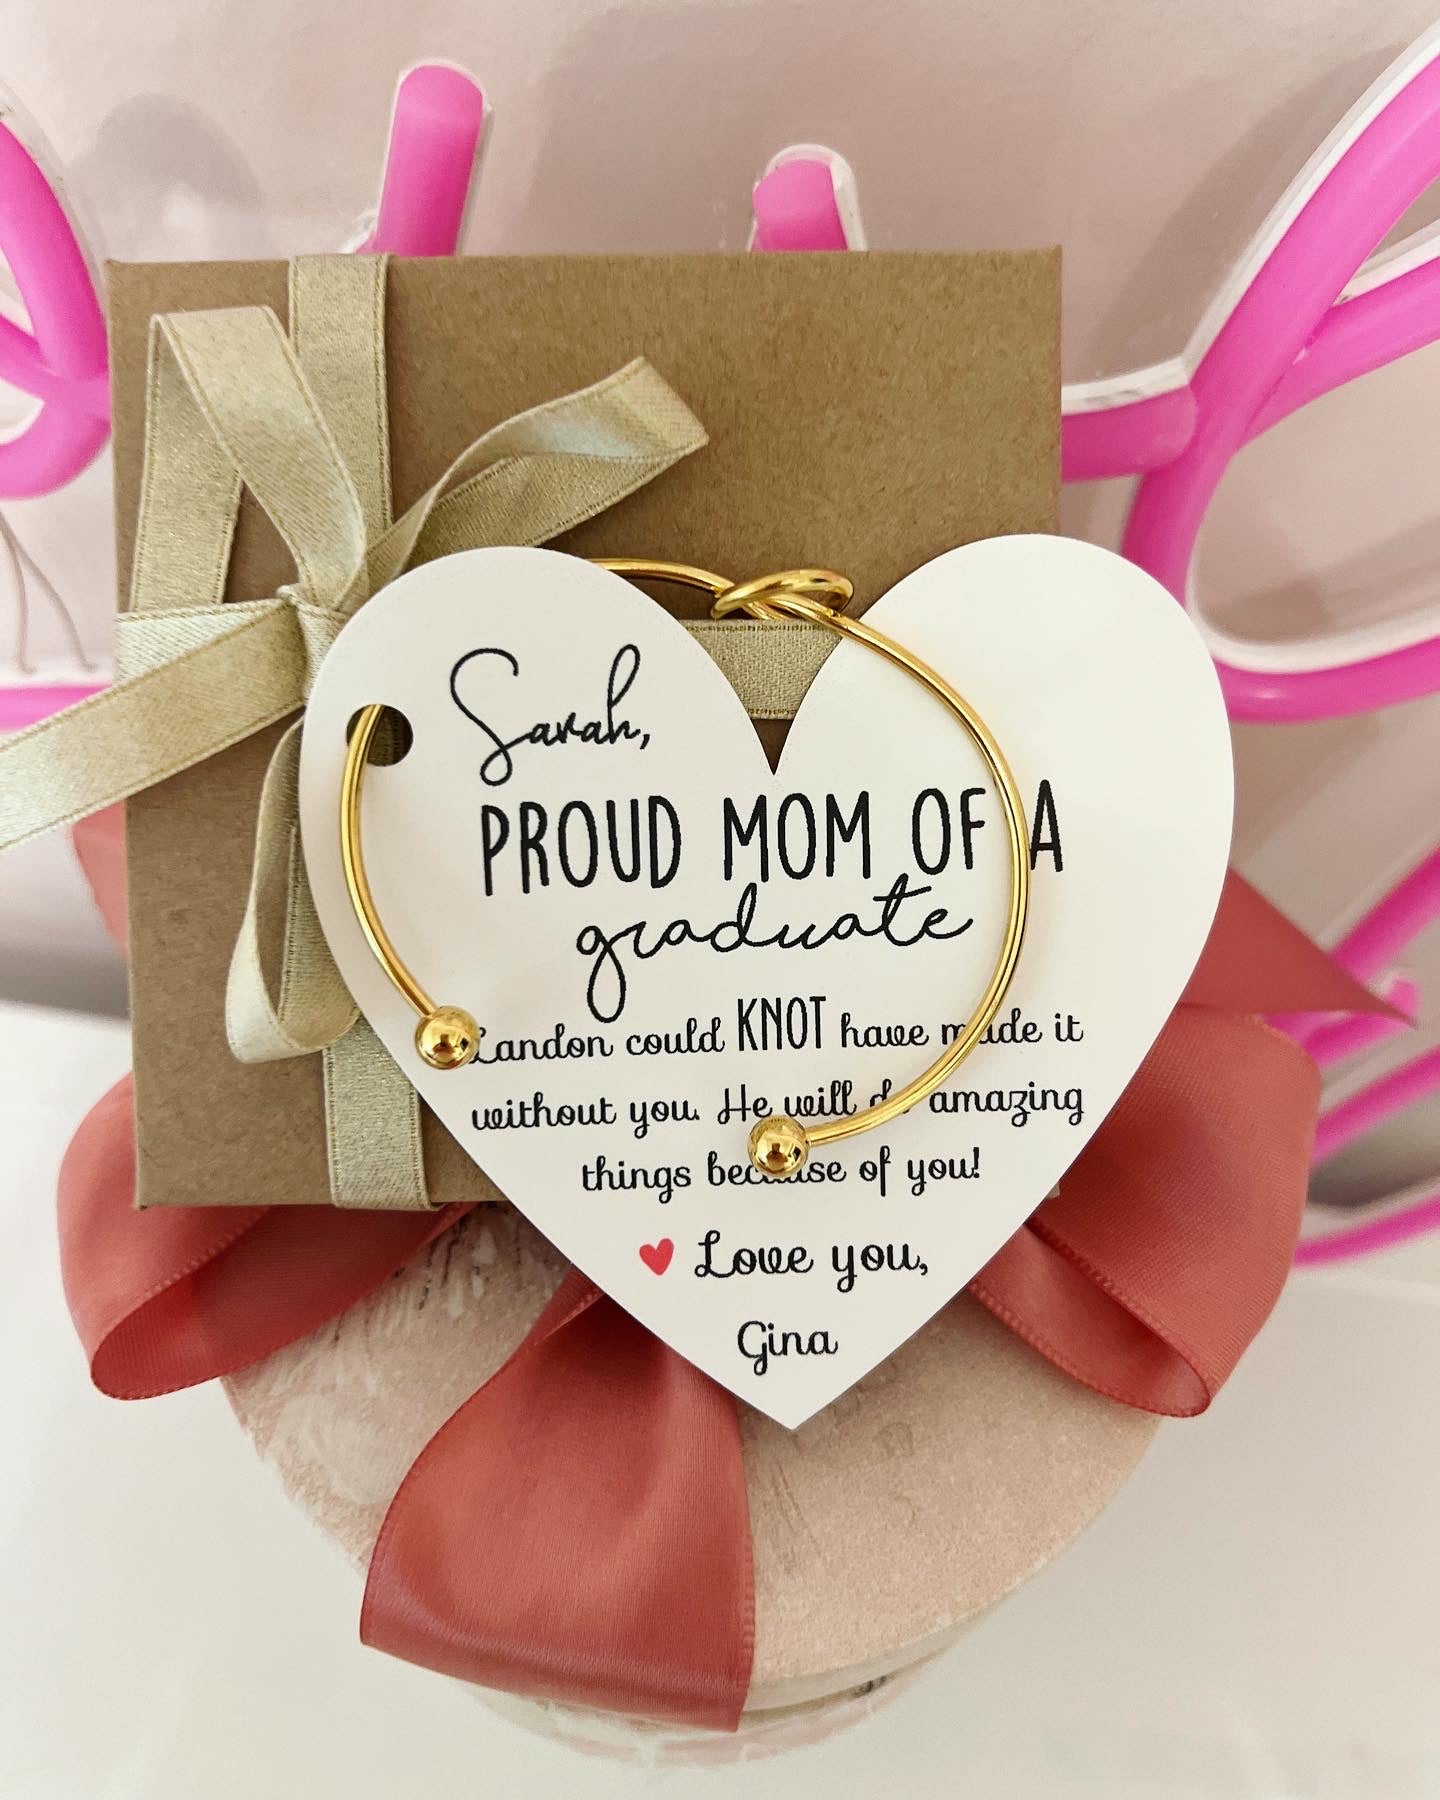 Proud Mom of a Graduate knot bangle gift, Graduation gift for parent, mom of a graduate, Graduation present, Gift for friend of graduate